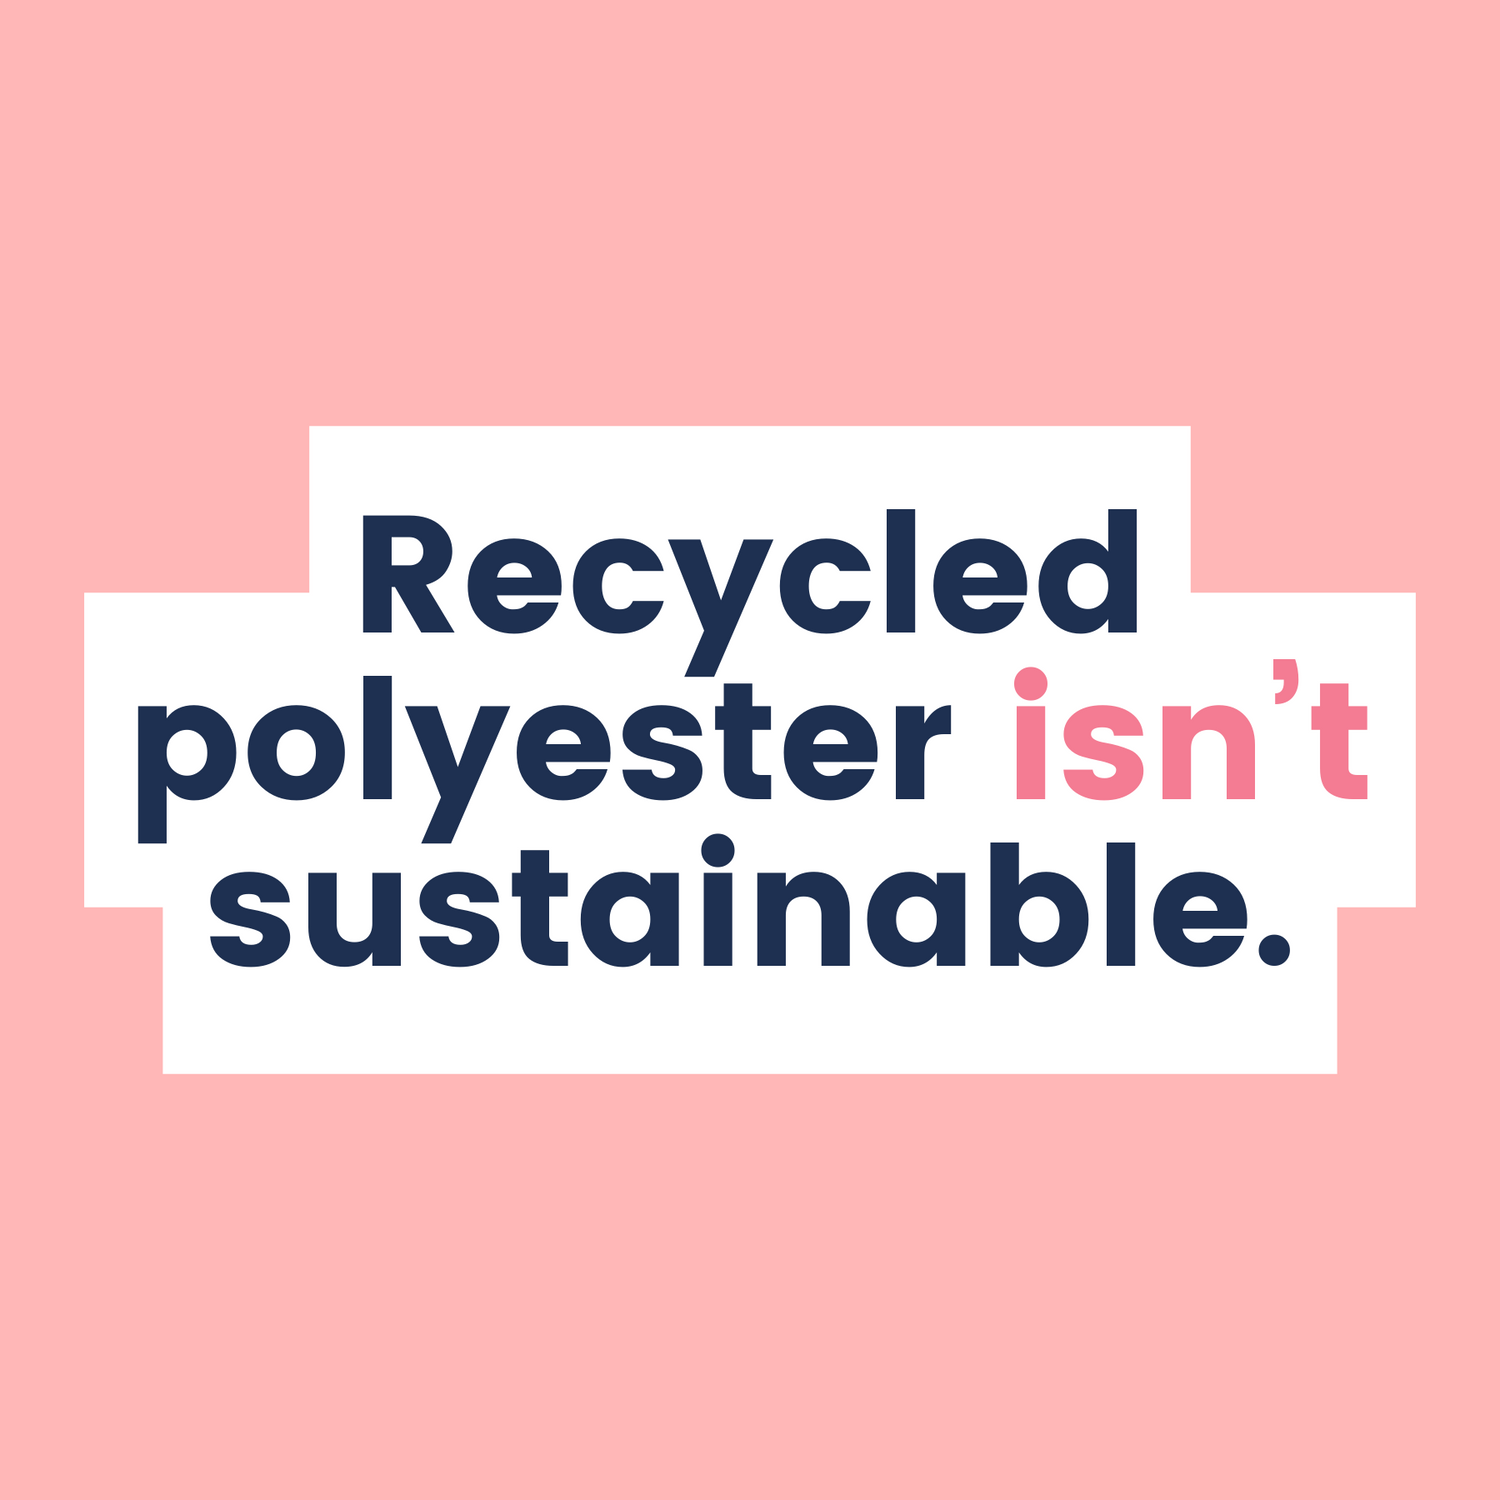 Is recycled polyester sustainable material for fashion? No, and it's not circular either.